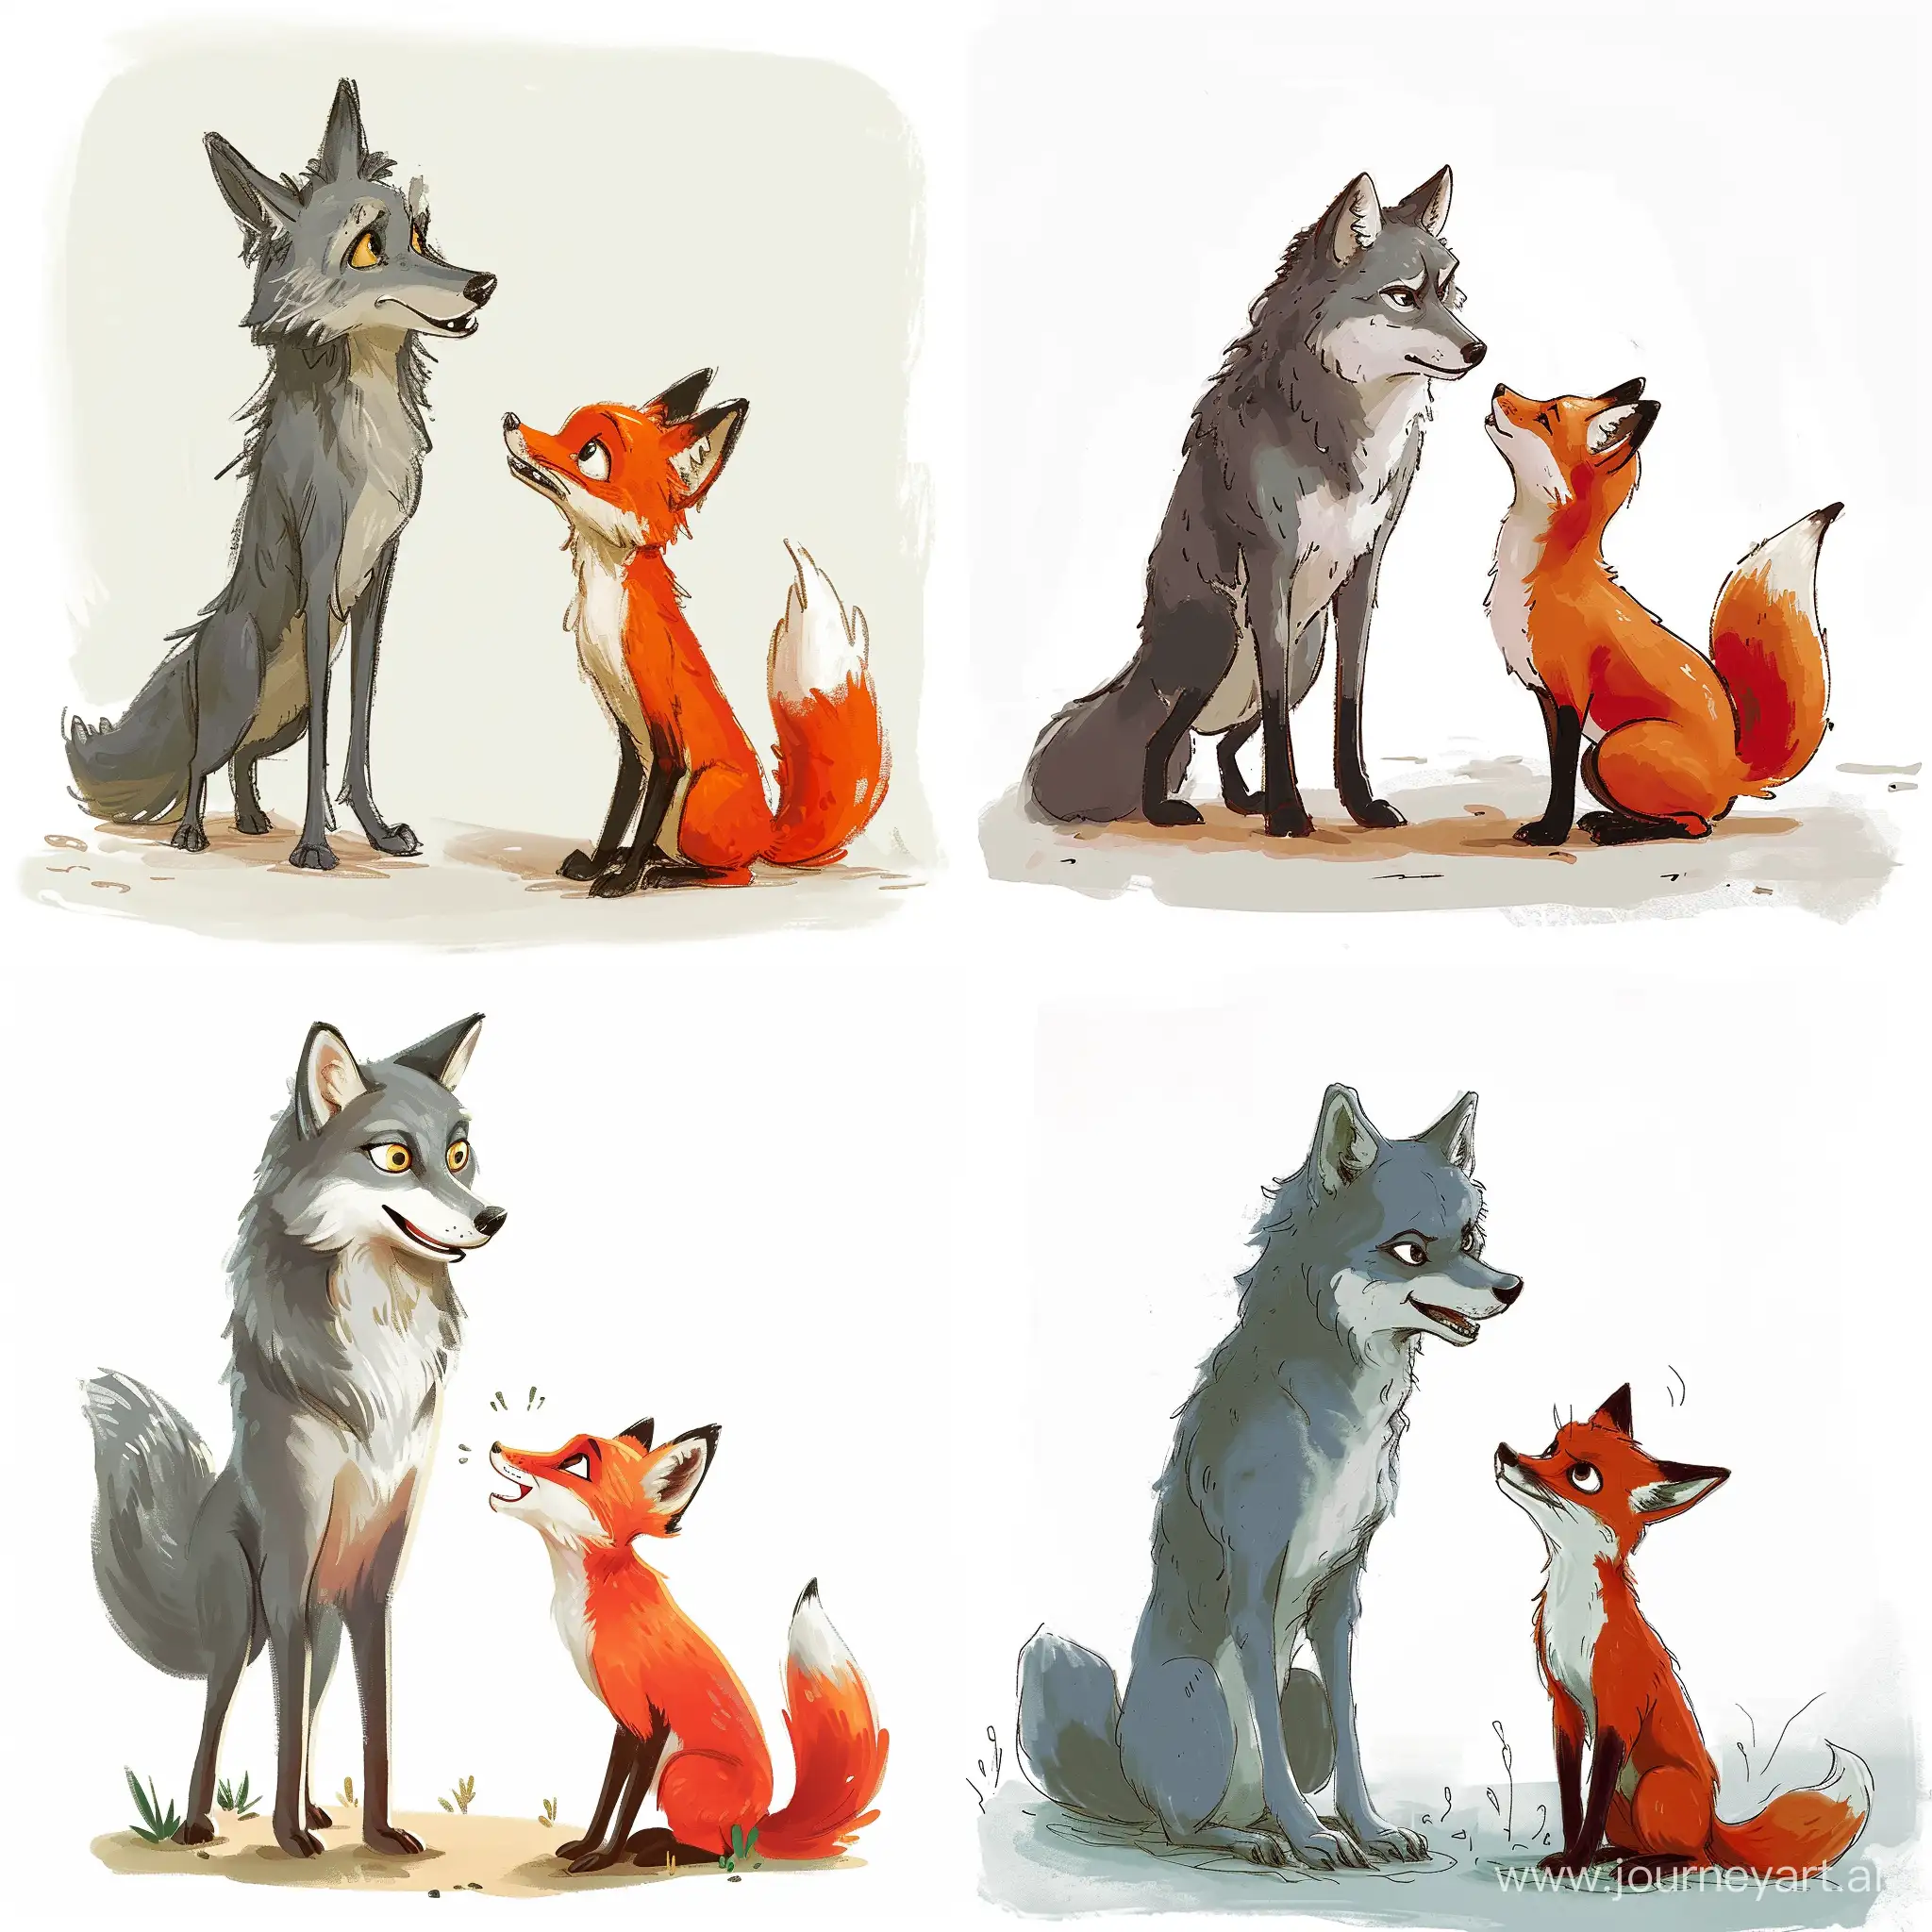 A gray wolf standing and talking with a red fox, on a white background, in caricature style